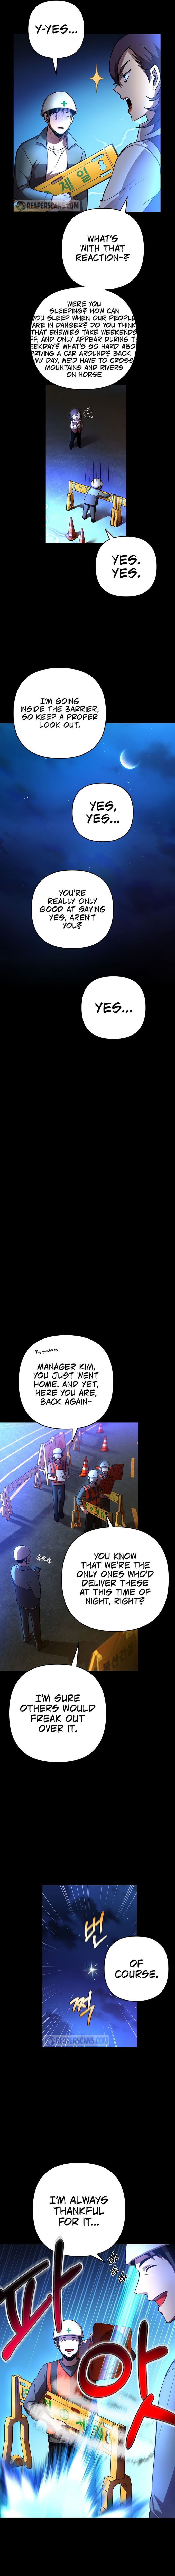 Cursed Manager’s Regression Chapter 1 page 11